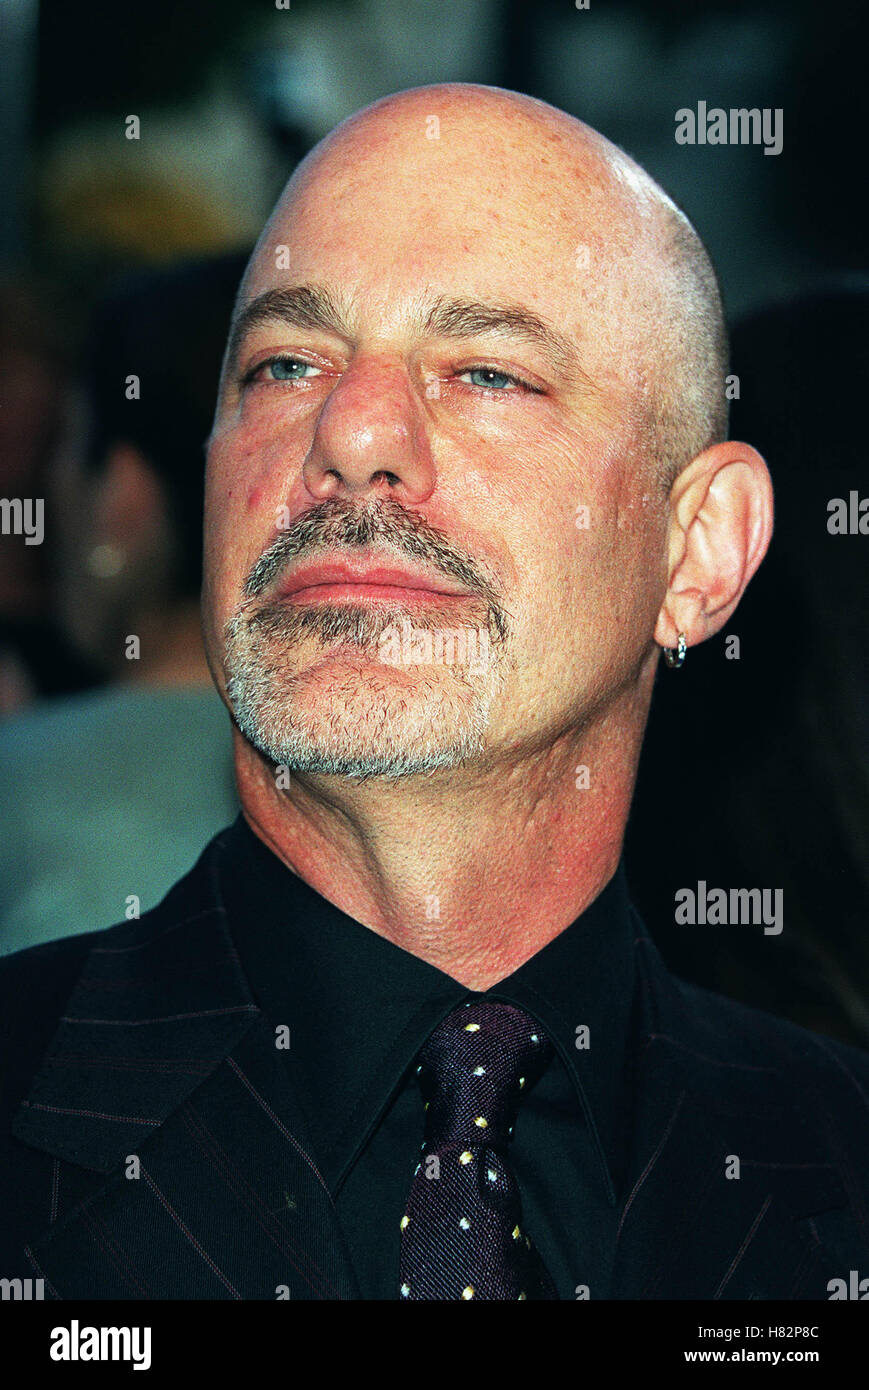 ROB COHEN 'FAST AND FURIOUS' FILM PREMIERE LOS ANGELES USA 18 June 2001 Stock Photo